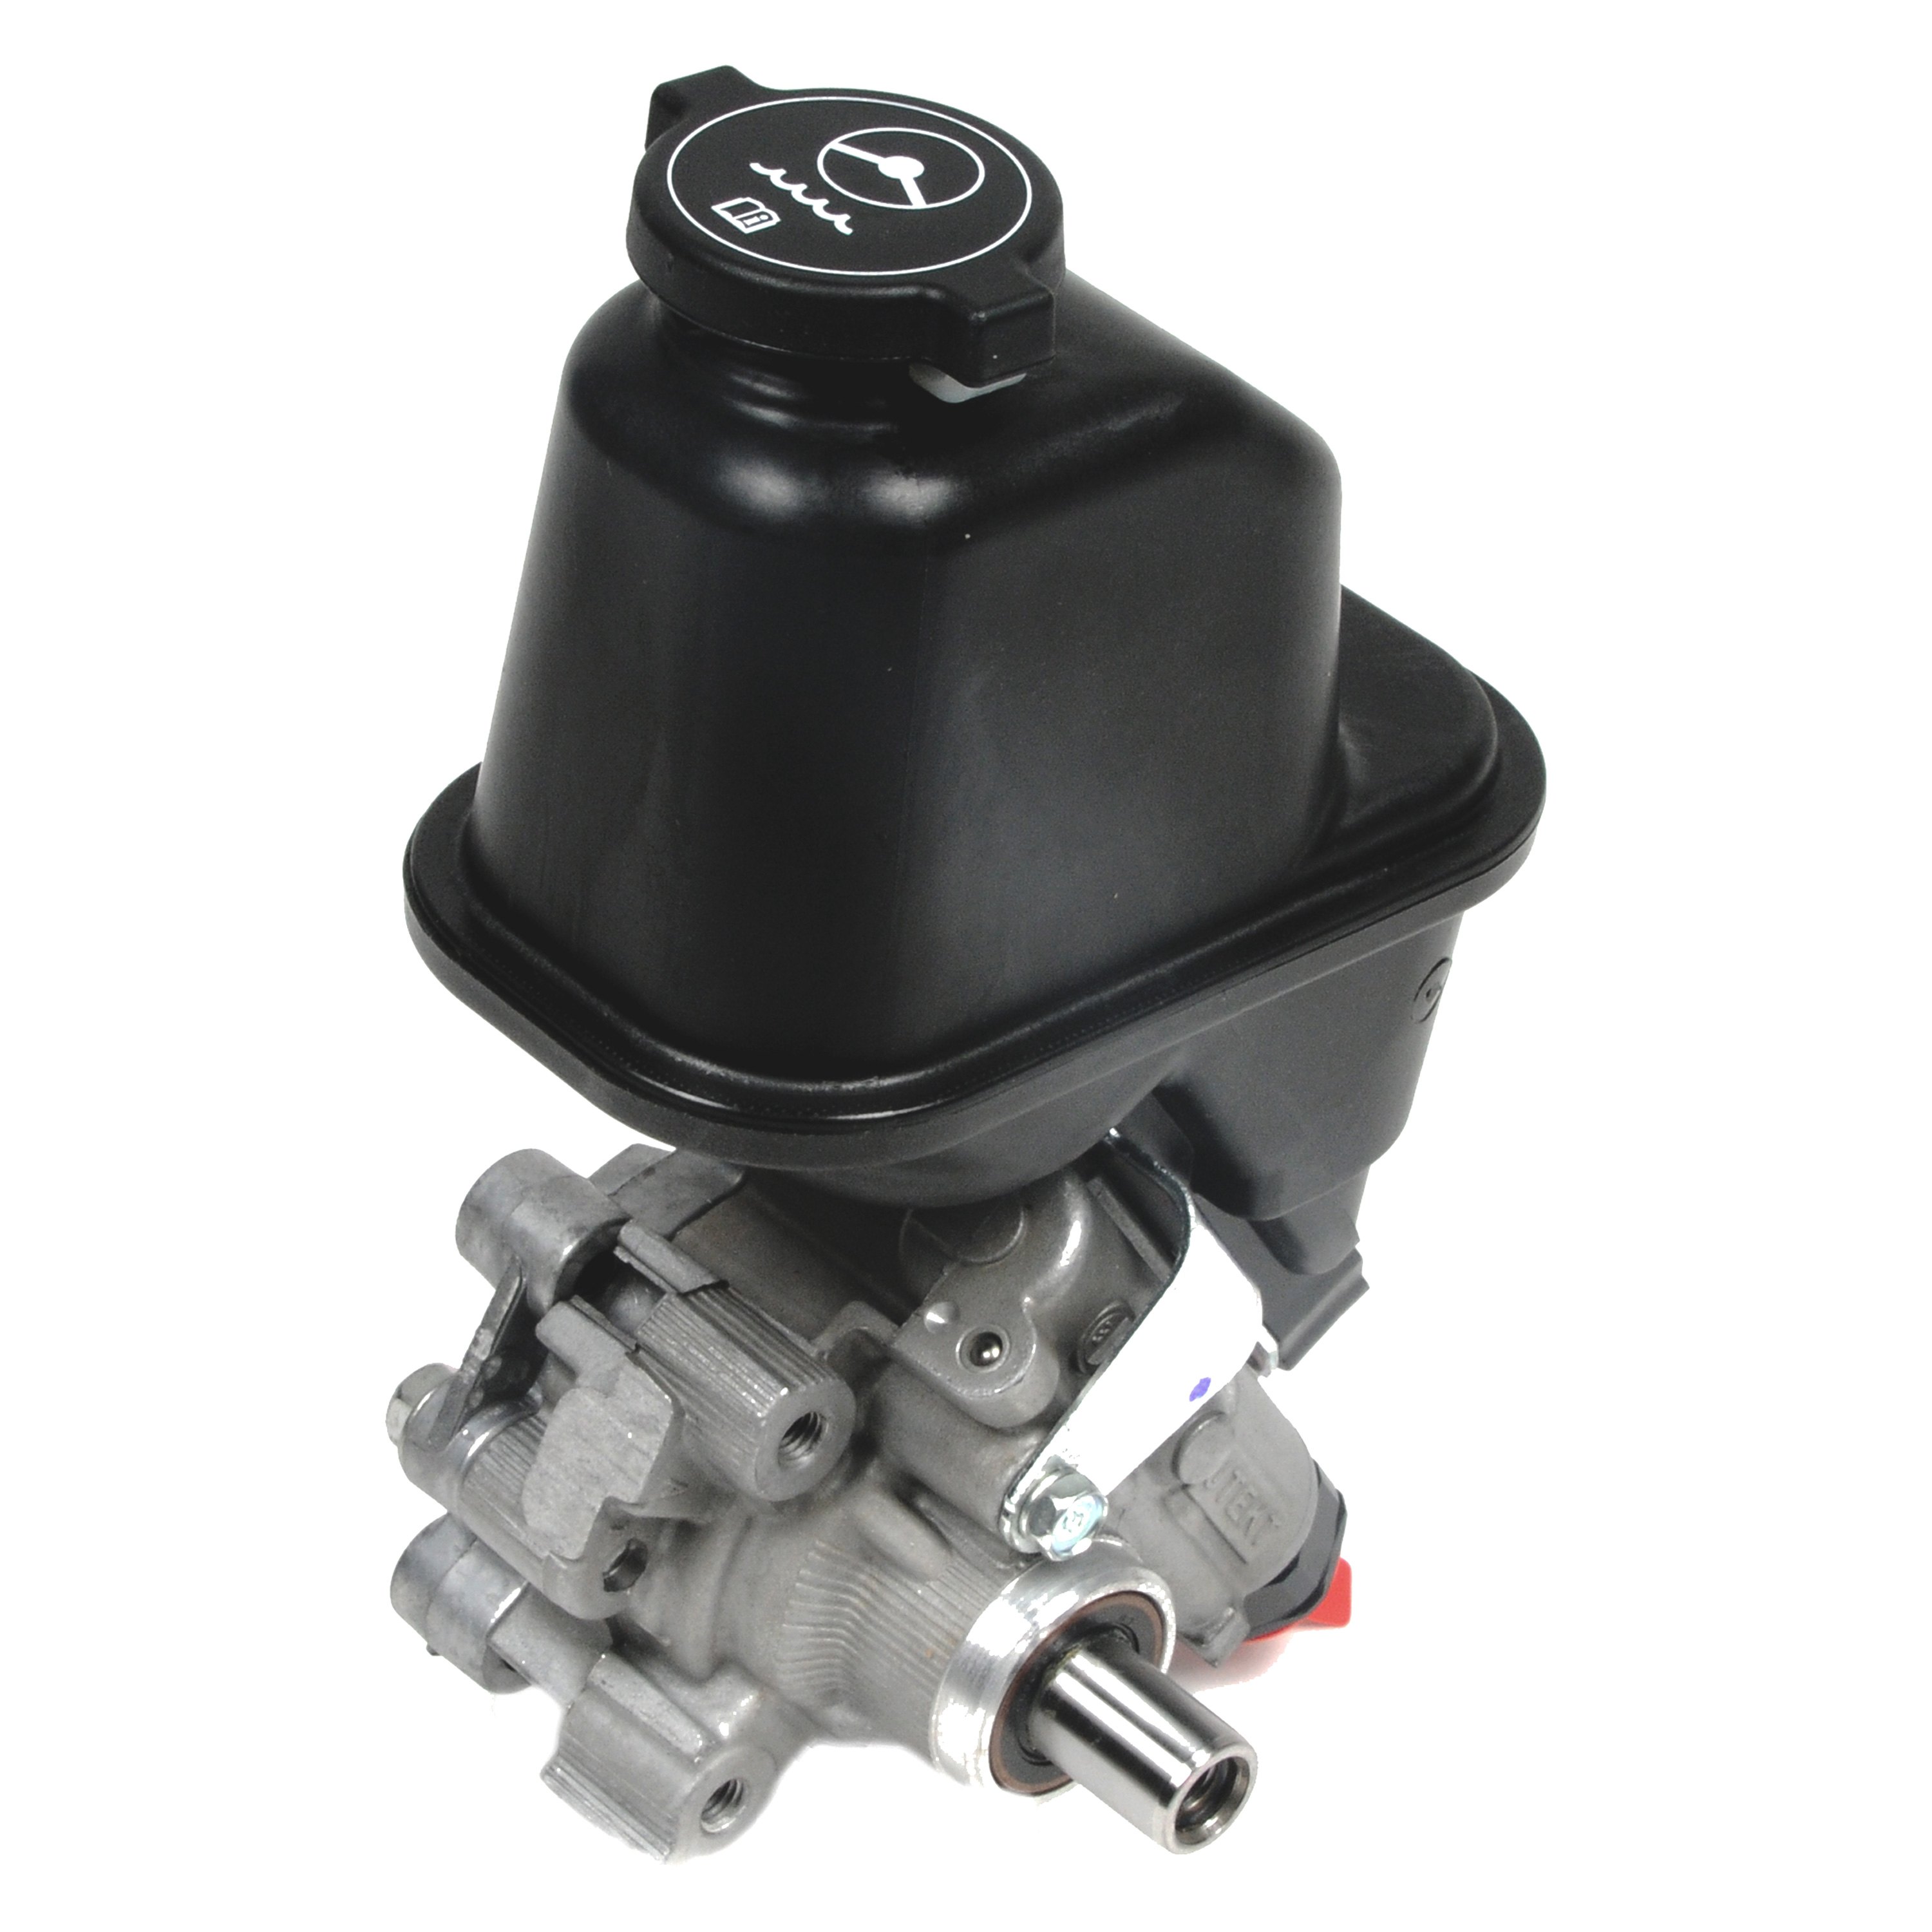 ACDelco 36P0716 Professional Power Steering Pump Remanufactured 